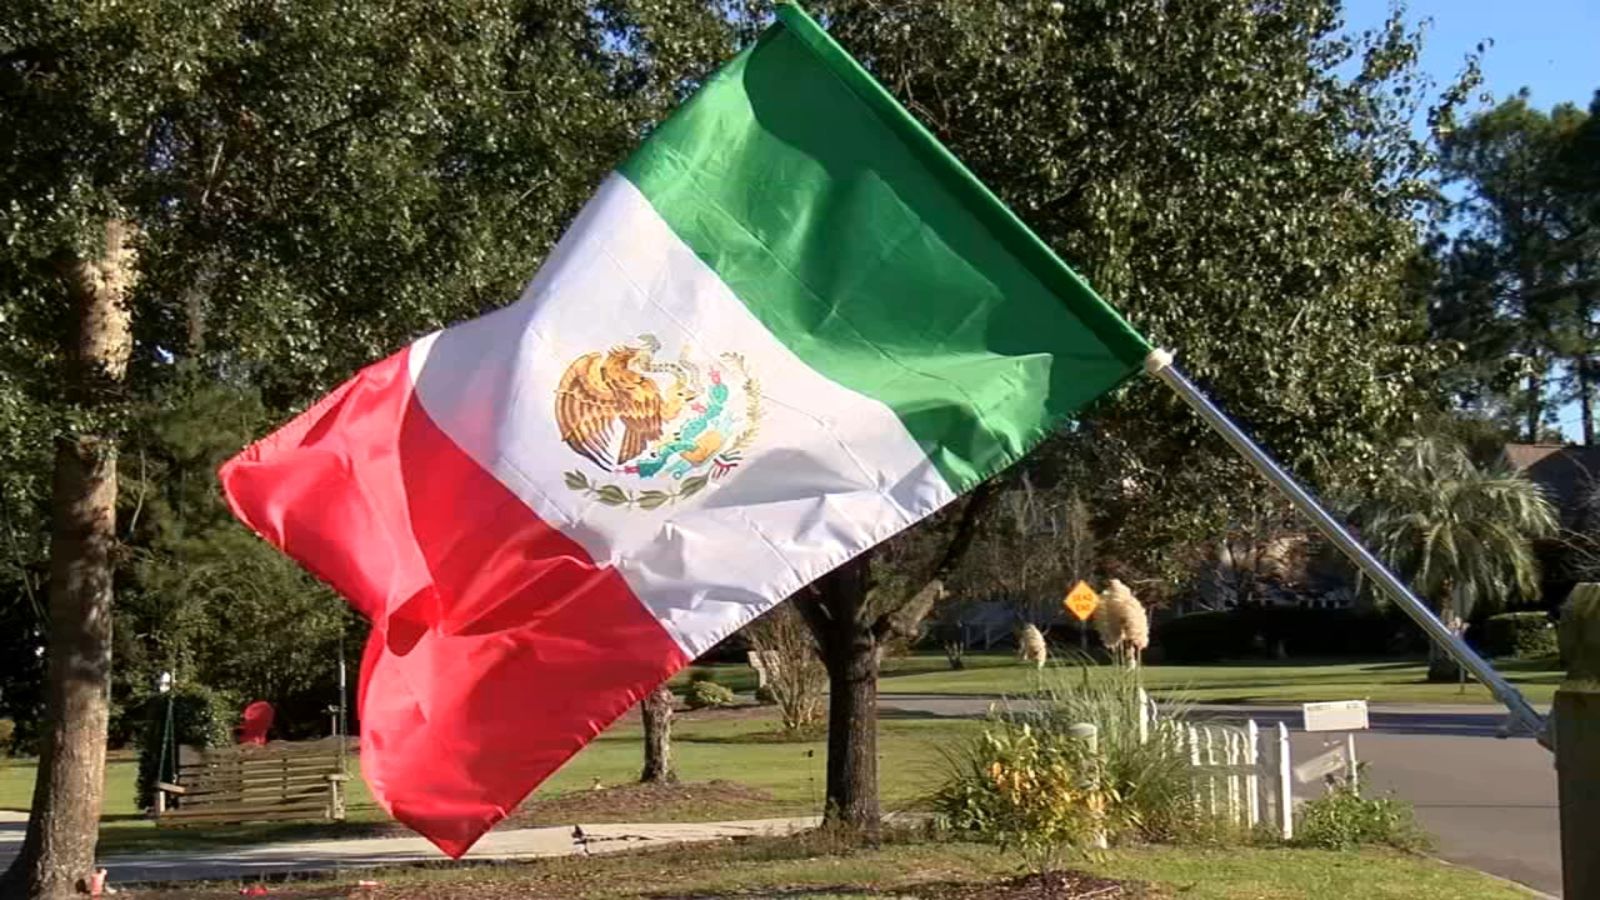 Feel my wrath': Racist letter threatens North Carolina family who flew Mexican flag outside their home